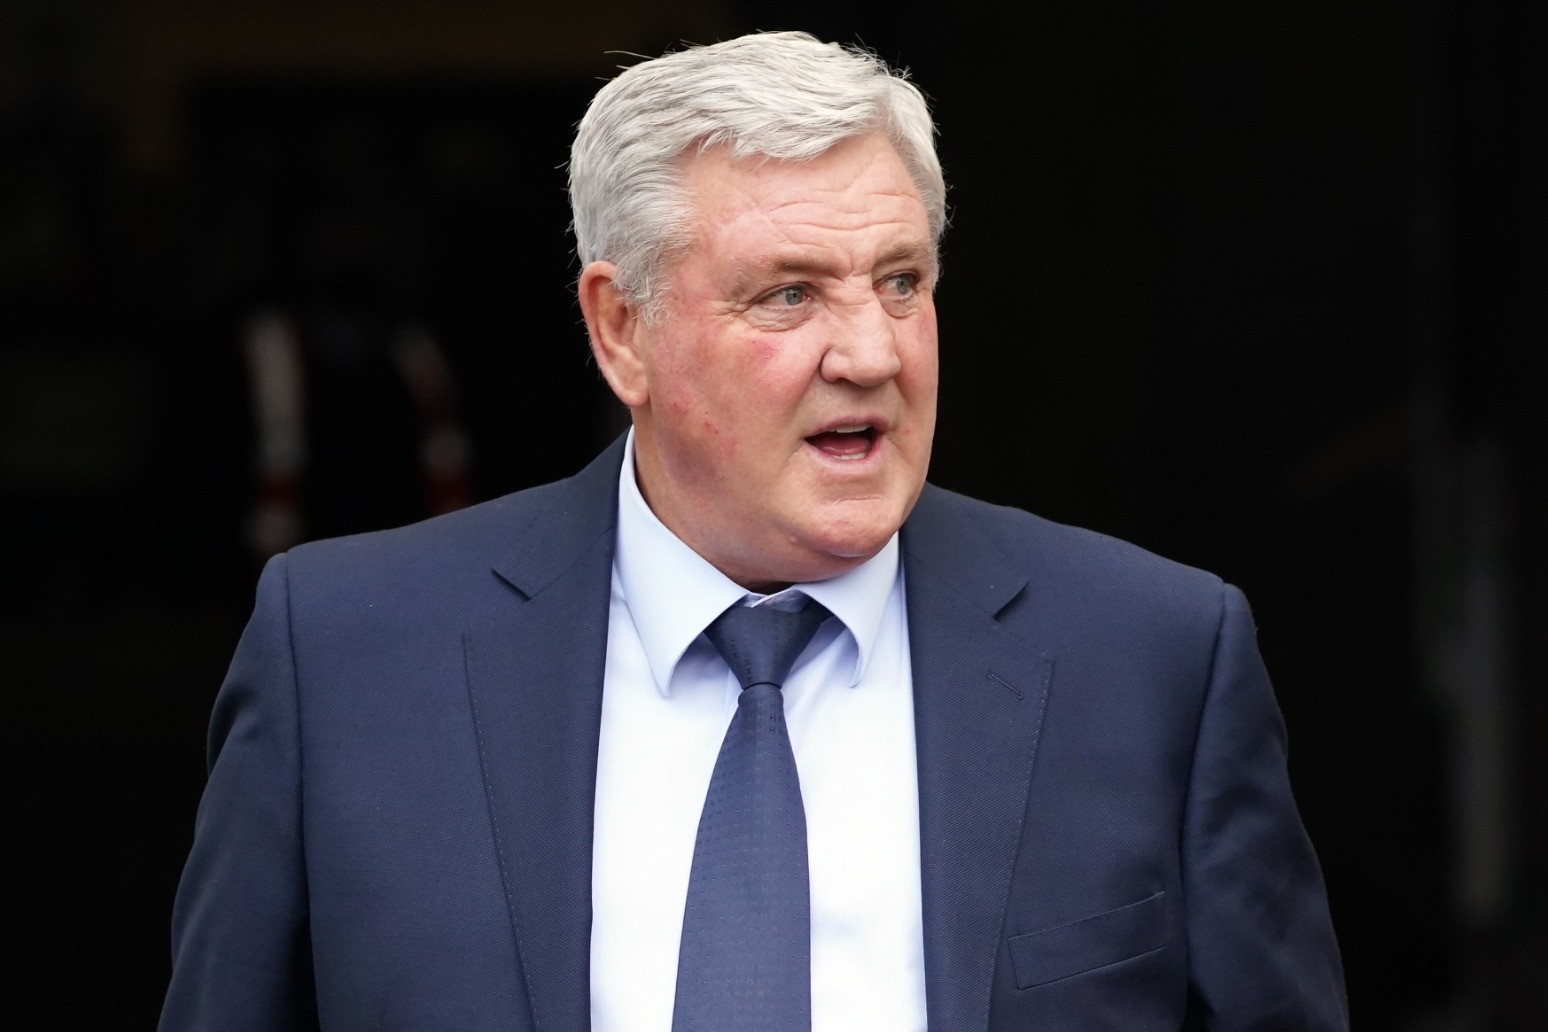 Steve Bruce appointed West Brom manager on 18 month deal